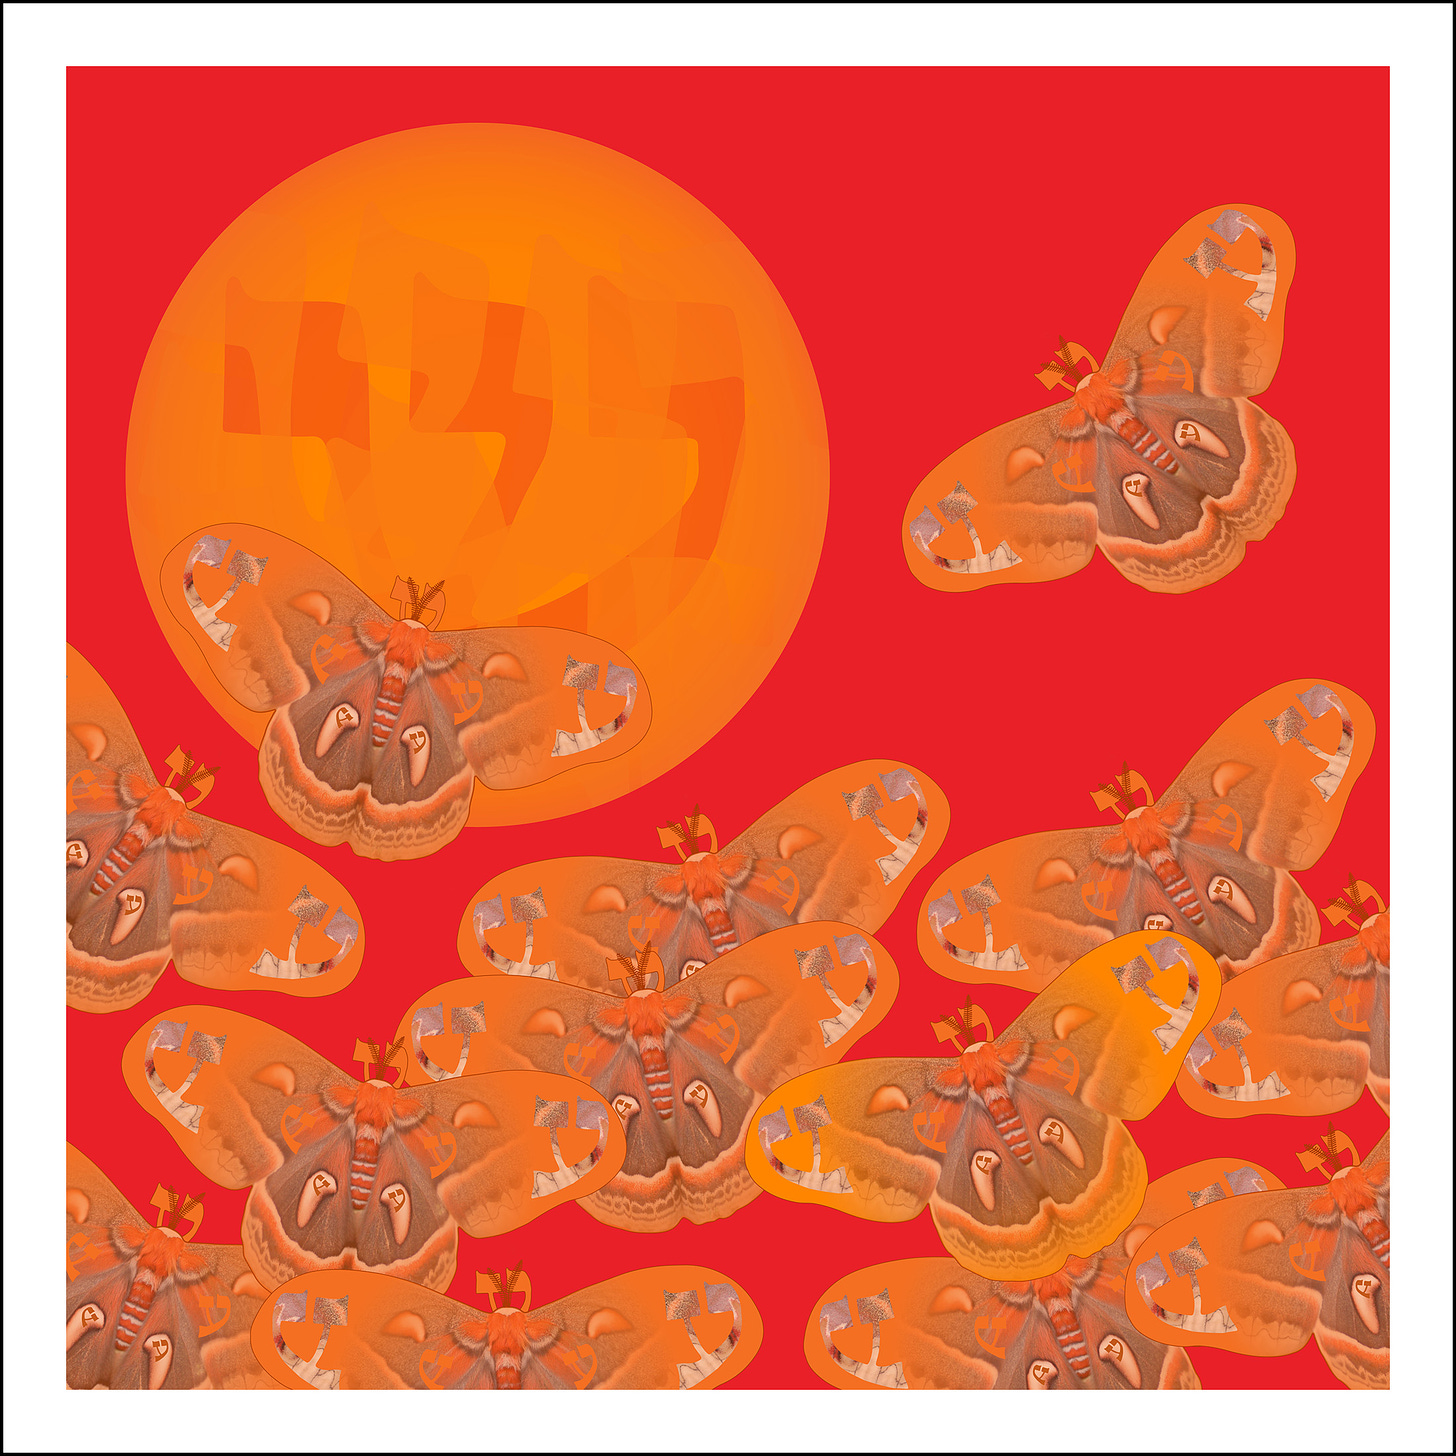 01. Red Orange, Year 7 of Rainbow Squared. A flat red background with thirteen moths colored in orange with the Hebrew letter Ayin on their wings fly toward an orange orb with the Hebrew letter Shin inside of it.